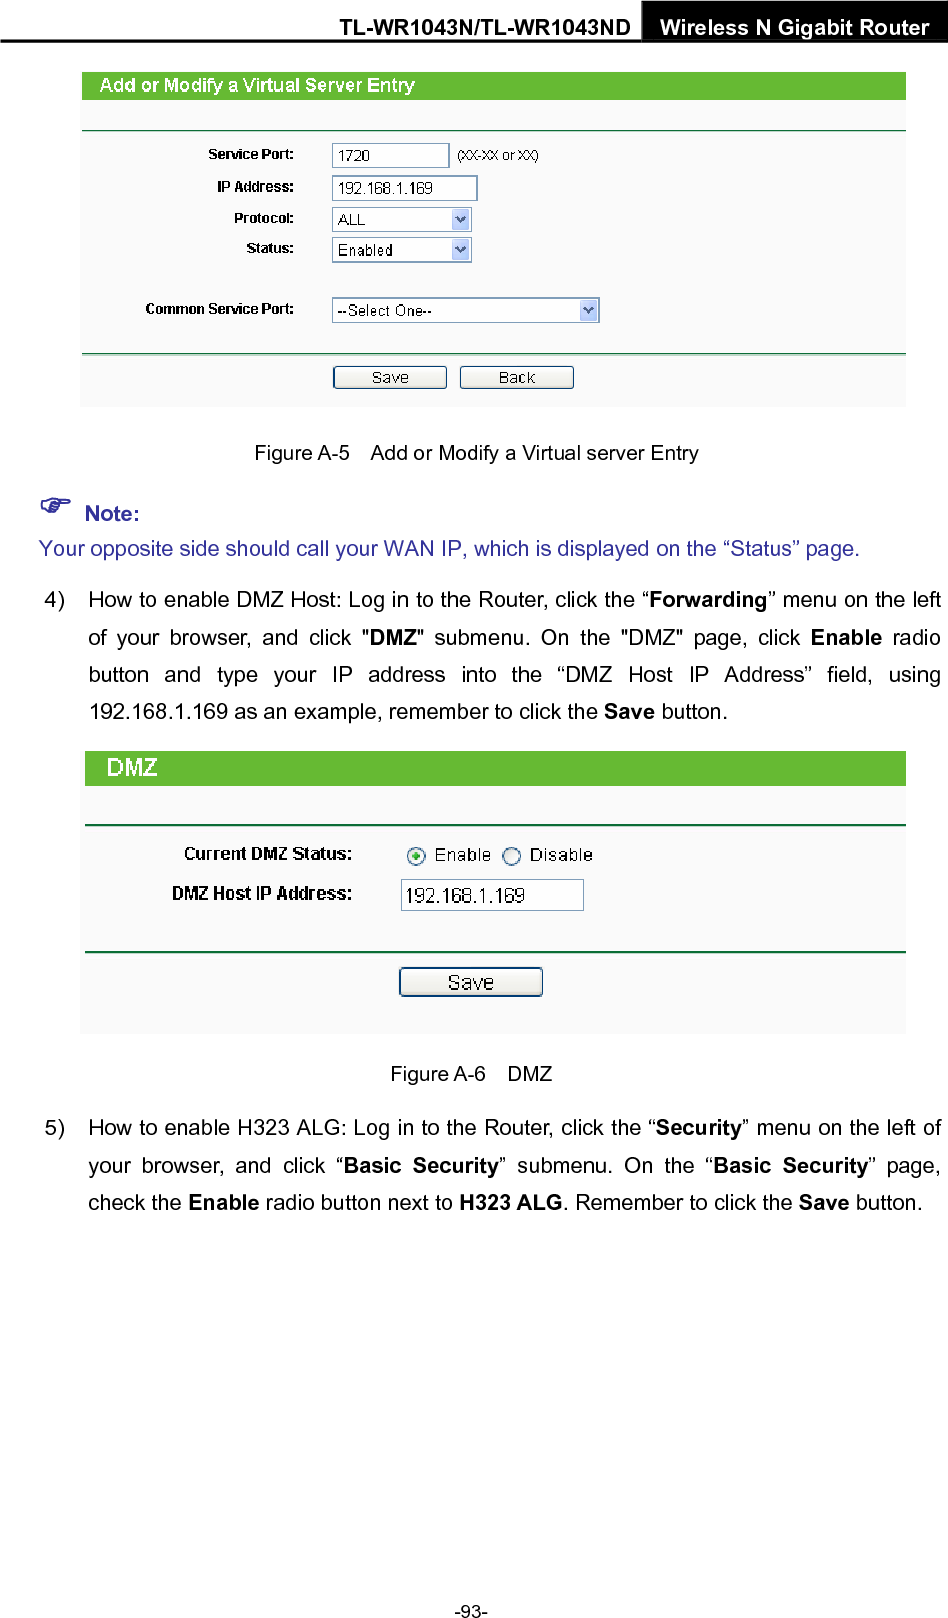 TL-WR1043N/TL-WR1043ND Wireless N Gigabit Router   Figure A-5    Add or Modify a Virtual server Entry ) Note: Your opposite side should call your WAN IP, which is displayed on the “Status” page. 4)  How to enable DMZ Host: Log in to the Router, click the “Forwarding” menu on the left of your browser, and click &quot;DMZ&quot; submenu. On the &quot;DMZ&quot; page, click Enable radio button and type your IP address into the “DMZ Host IP Address” field, using 192.168.1.169 as an example, remember to click the Save button.    Figure A-6  DMZ 5)  How to enable H323 ALG: Log in to the Router, click the “Security” menu on the left of your browser, and click “Basic Security” submenu. On the “Basic Security” page, check the Enable radio button next to H323 ALG. Remember to click the Save button. -93- 